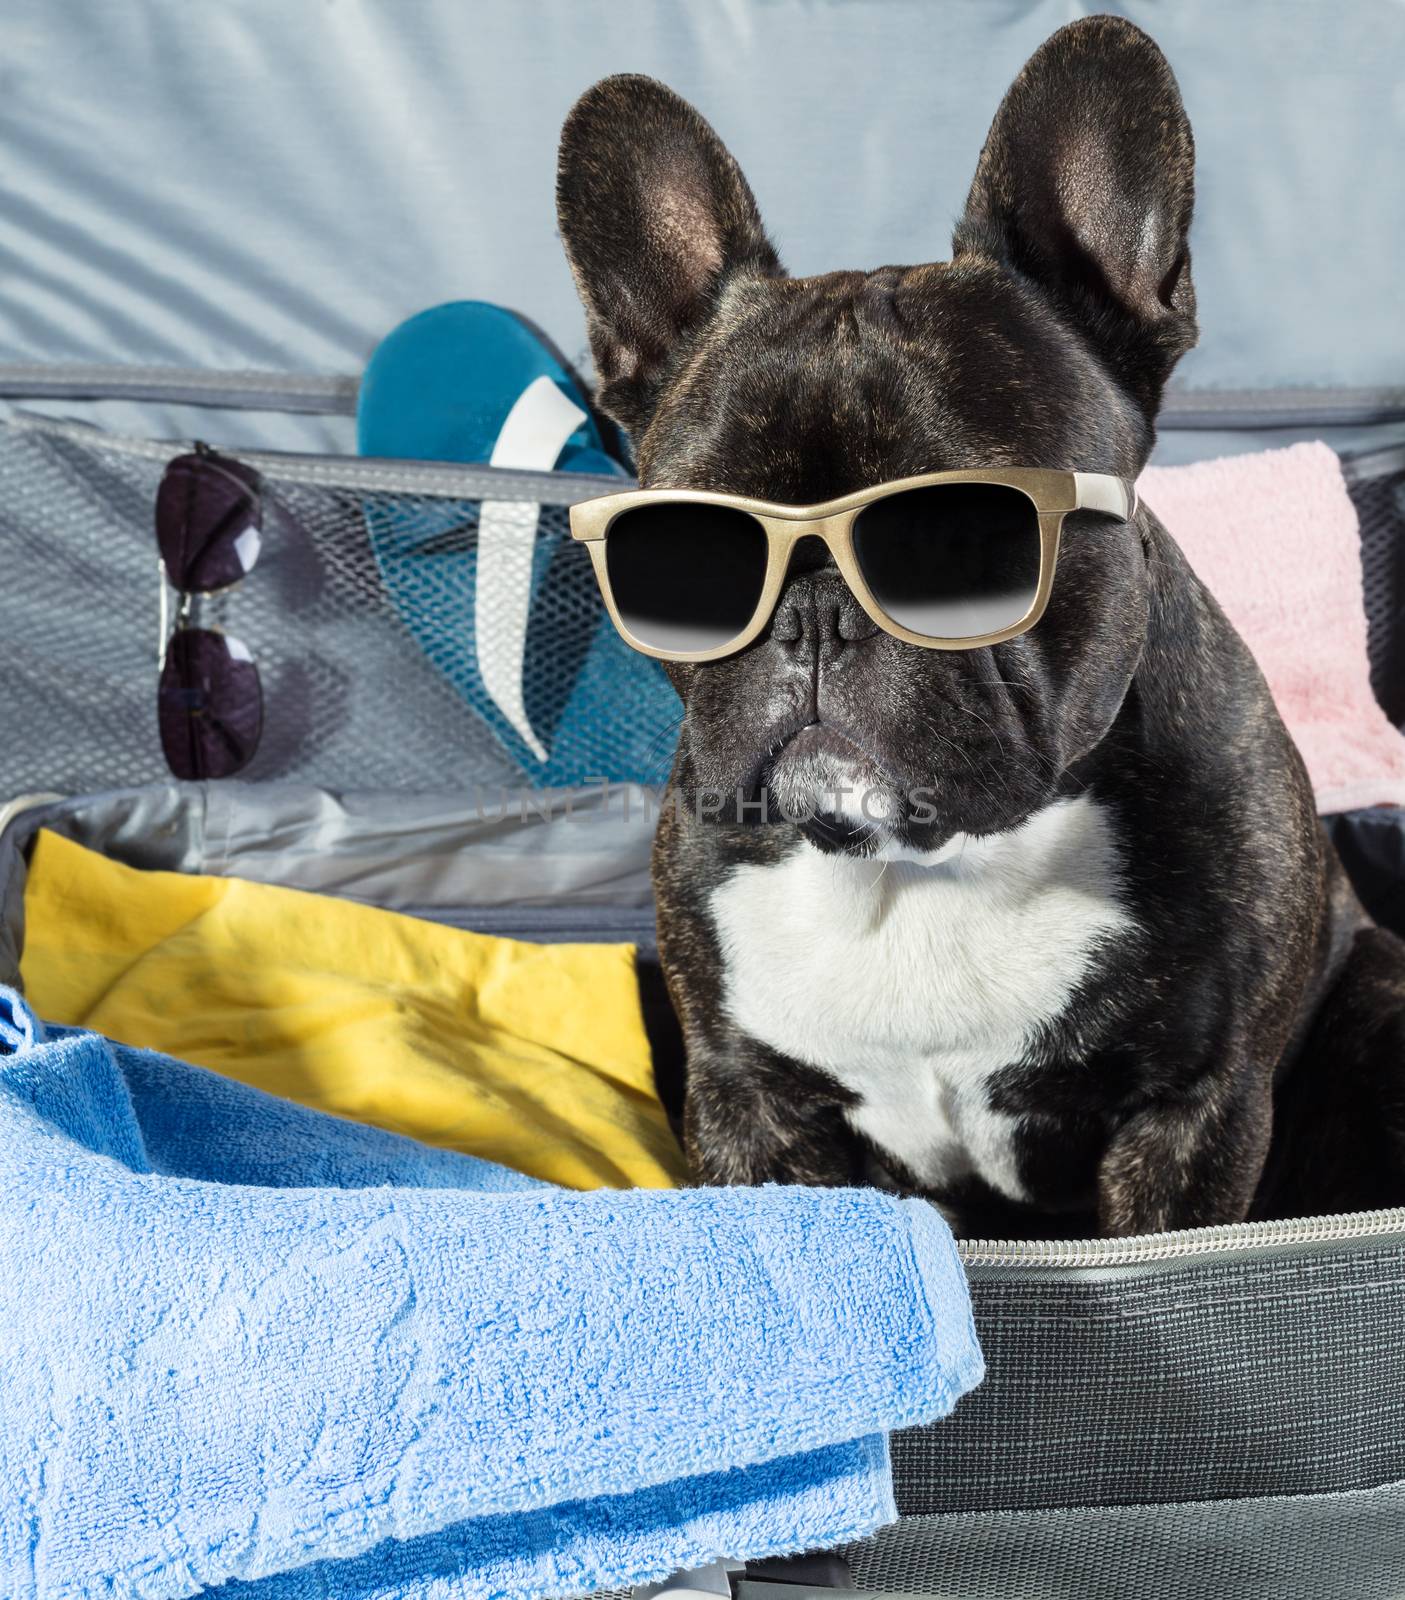 French bulldog with glasses sitting in a suitcase